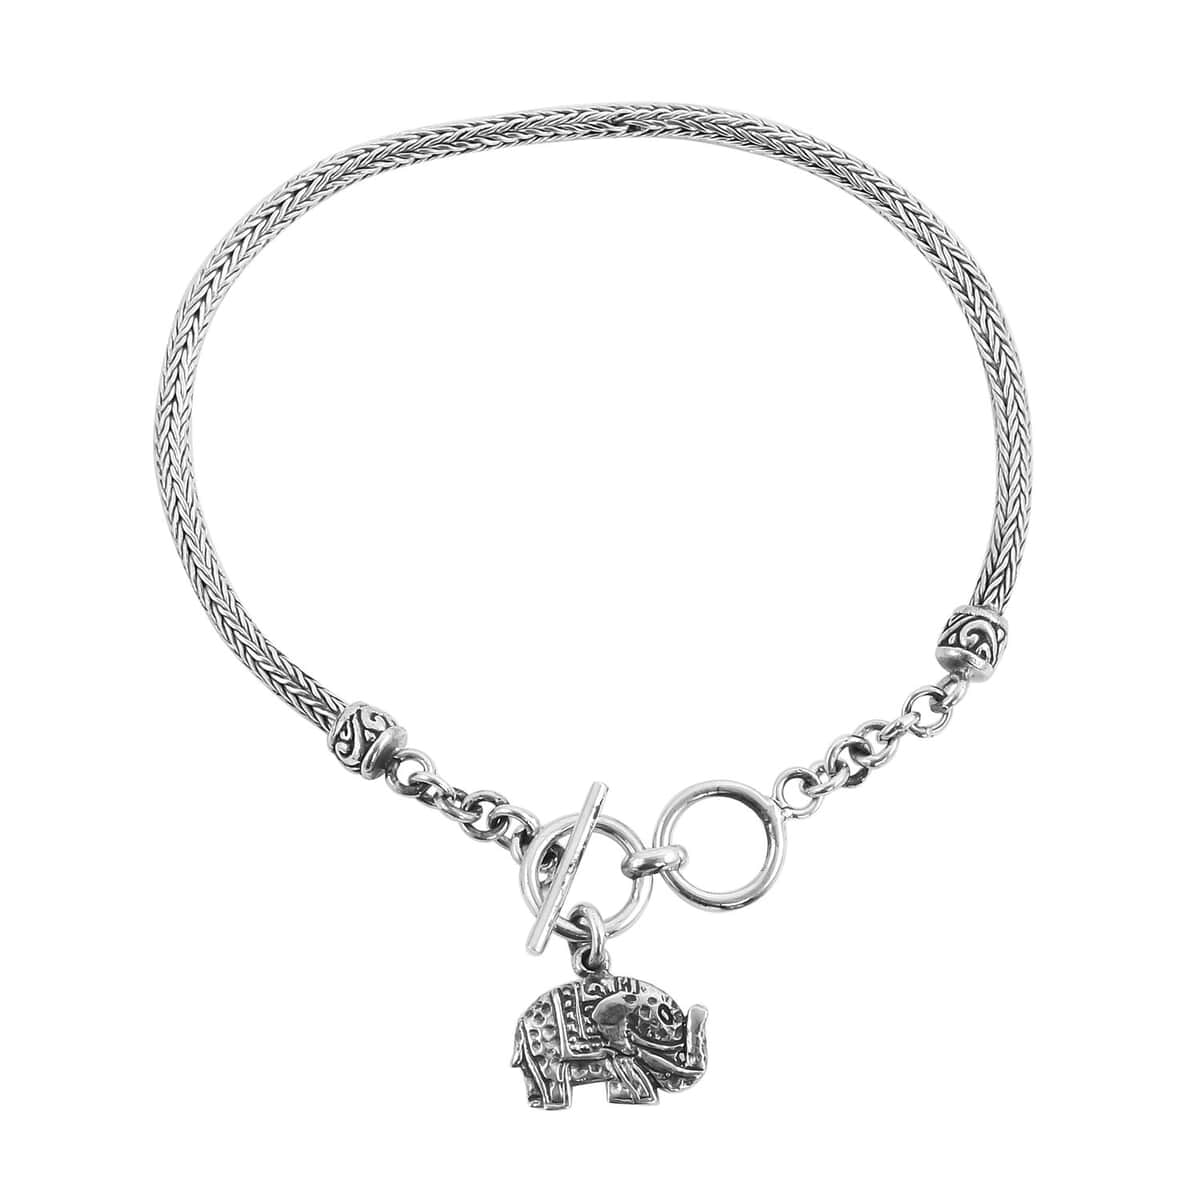 Doorbuster BALI LEGACY Sterling Silver Tulang Naga Bracelet with Elephant Charm (7.50 In) (8.20 g) image number 0